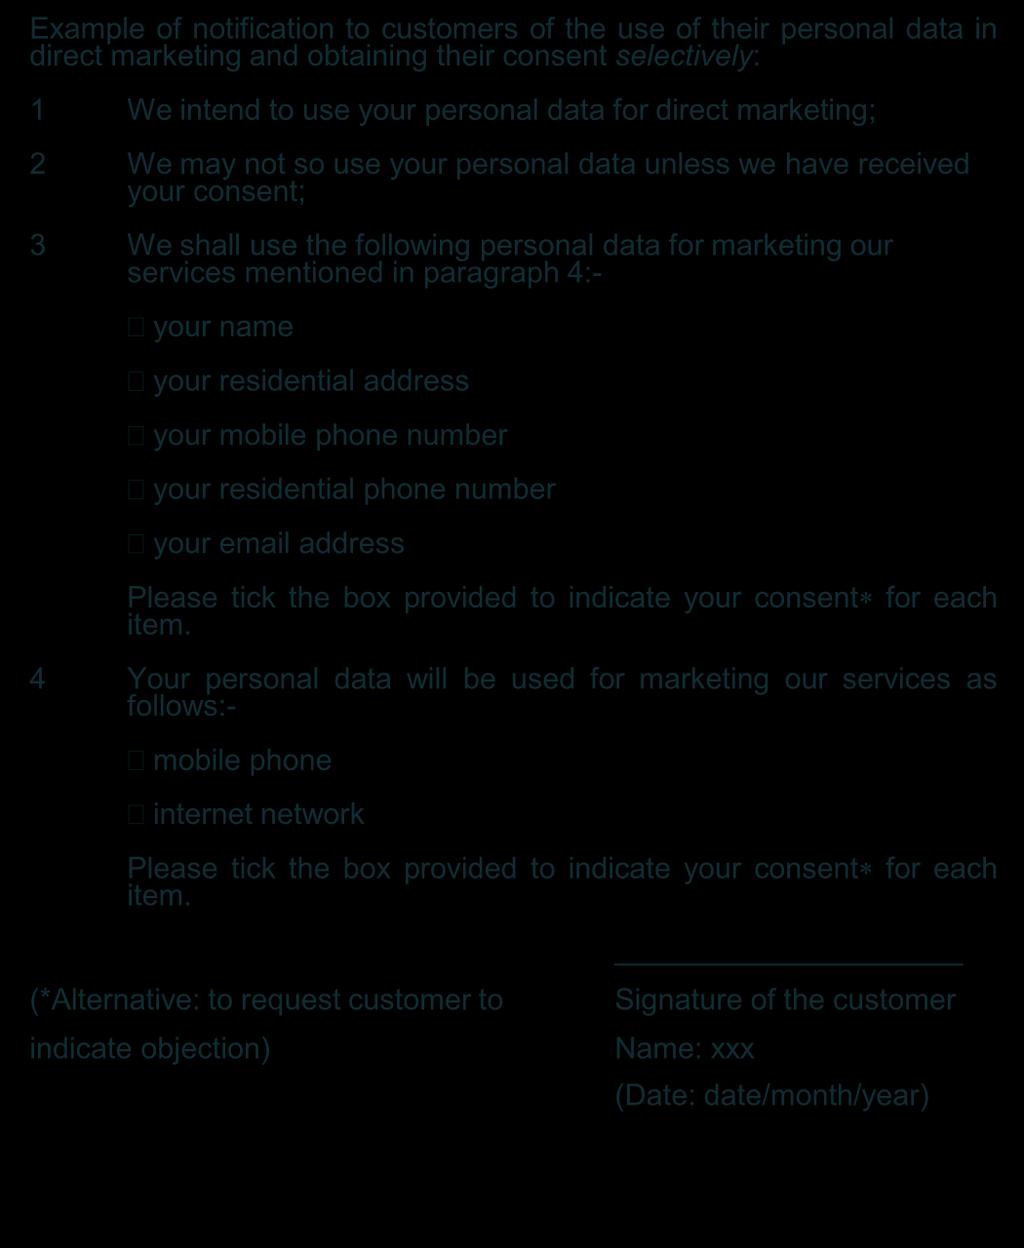 in paragraph 4:- your name your residential address your mobile phone number your residential phone number your email address Please tick the box provided to indicate your consent for each item.